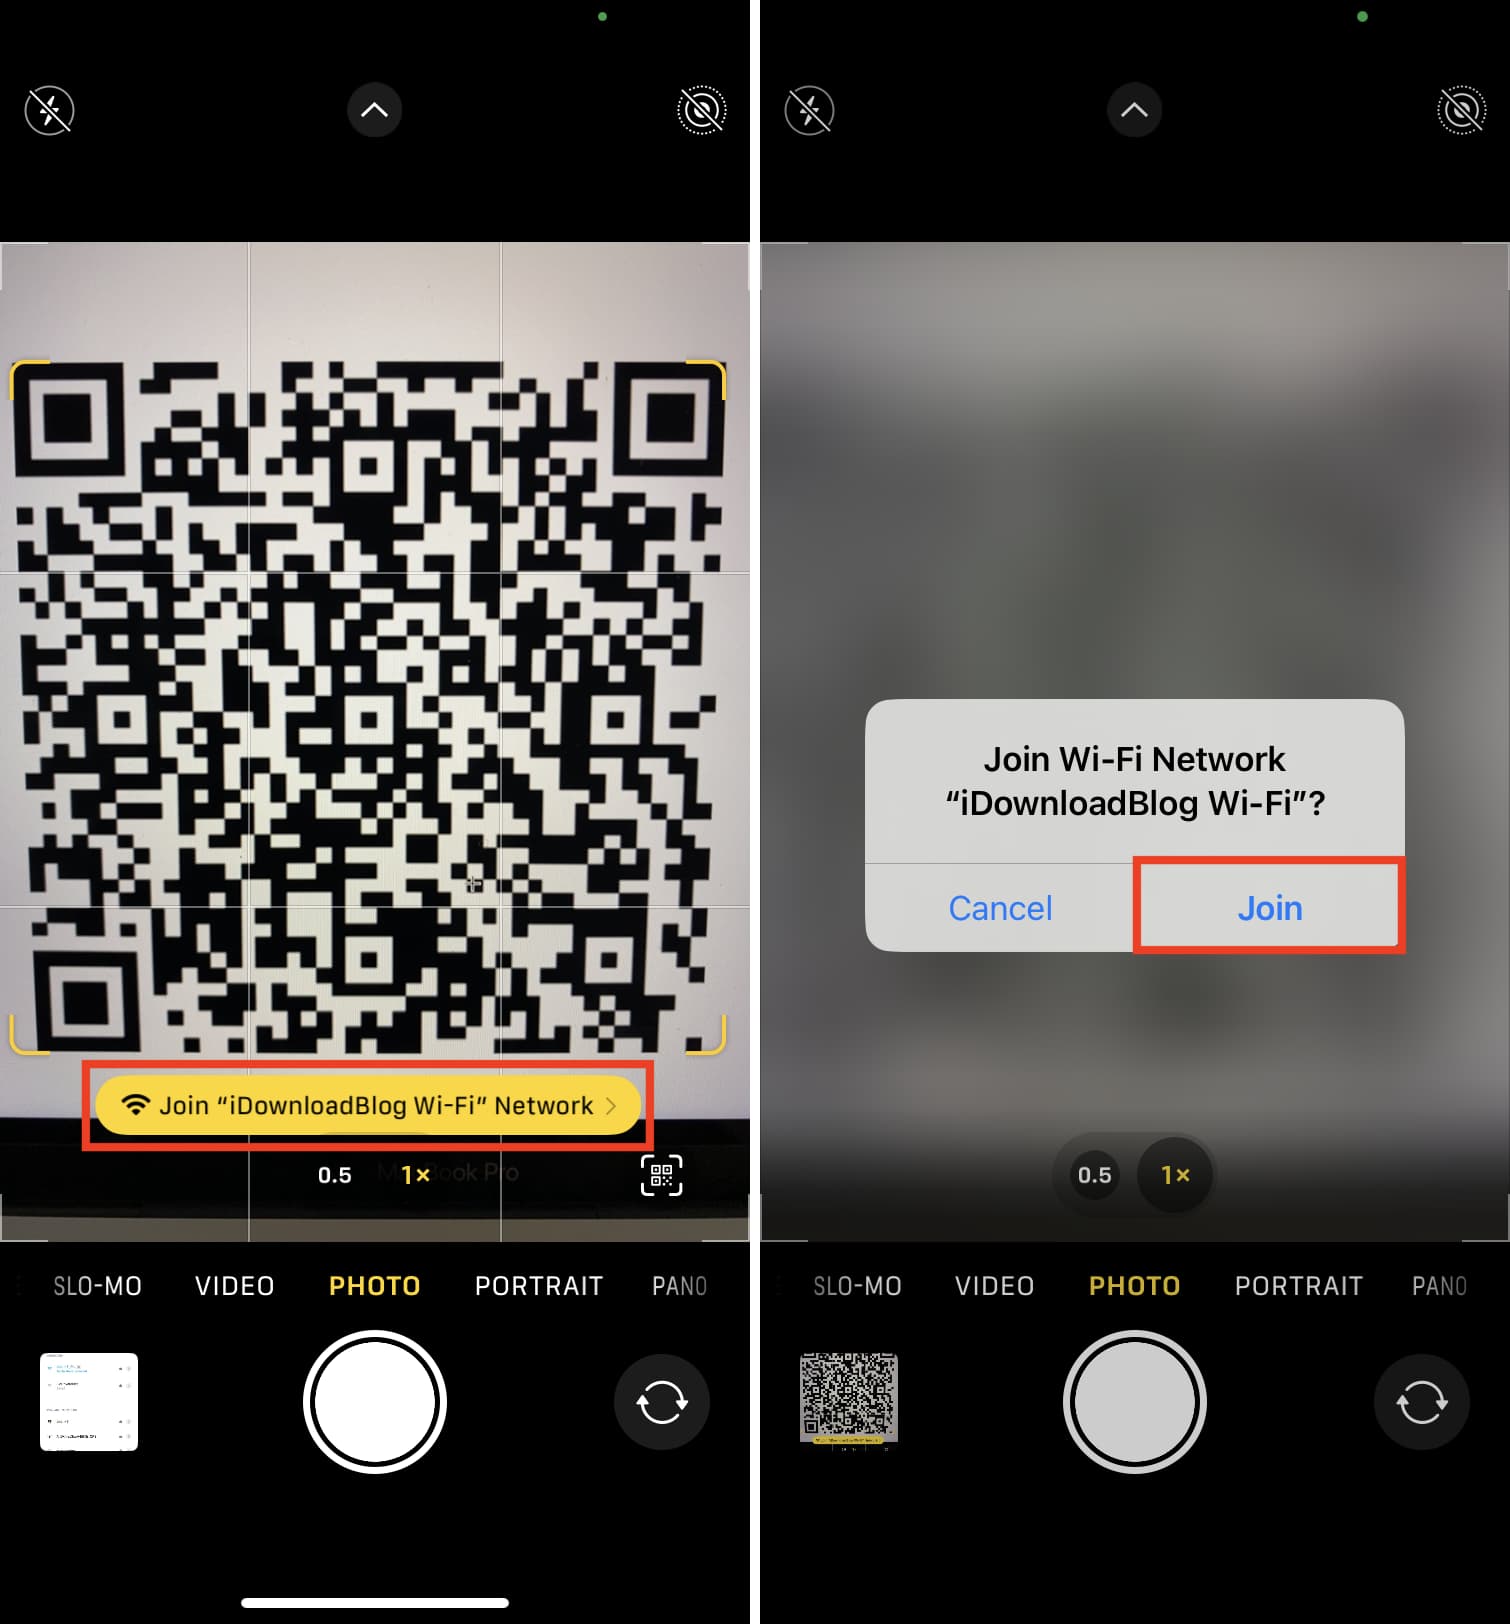 Join Wi-Fi Network by scanning QR code on iPhone